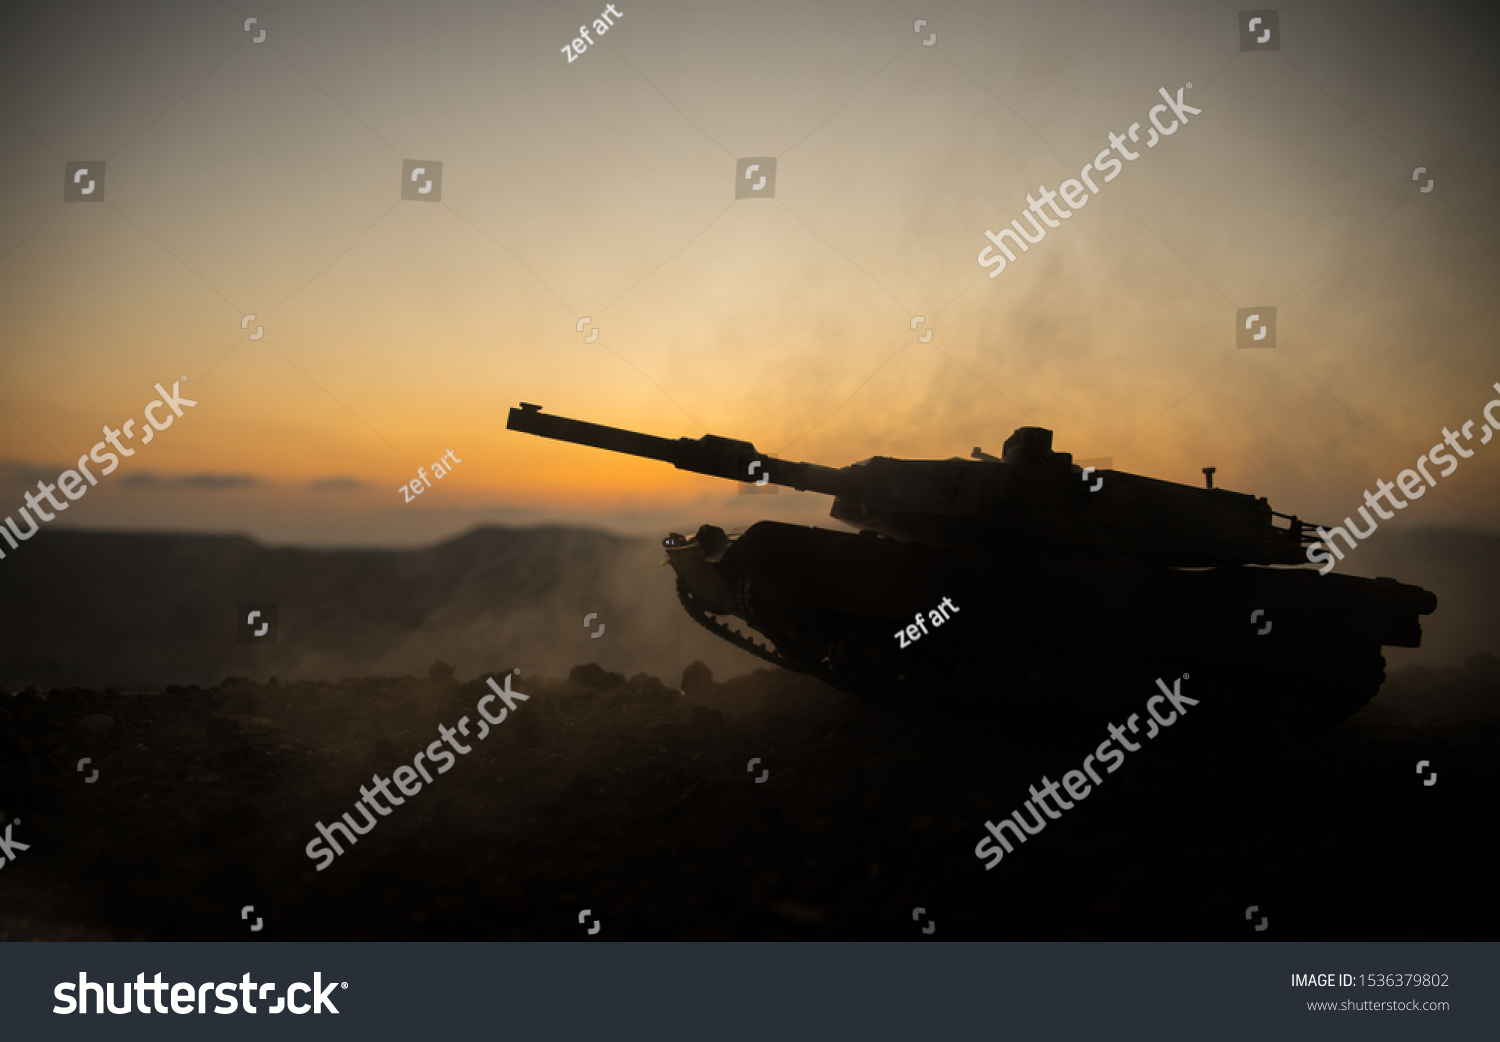 Armored fighting vehicle Images, Stock Photos & Vectors | Shutterstock